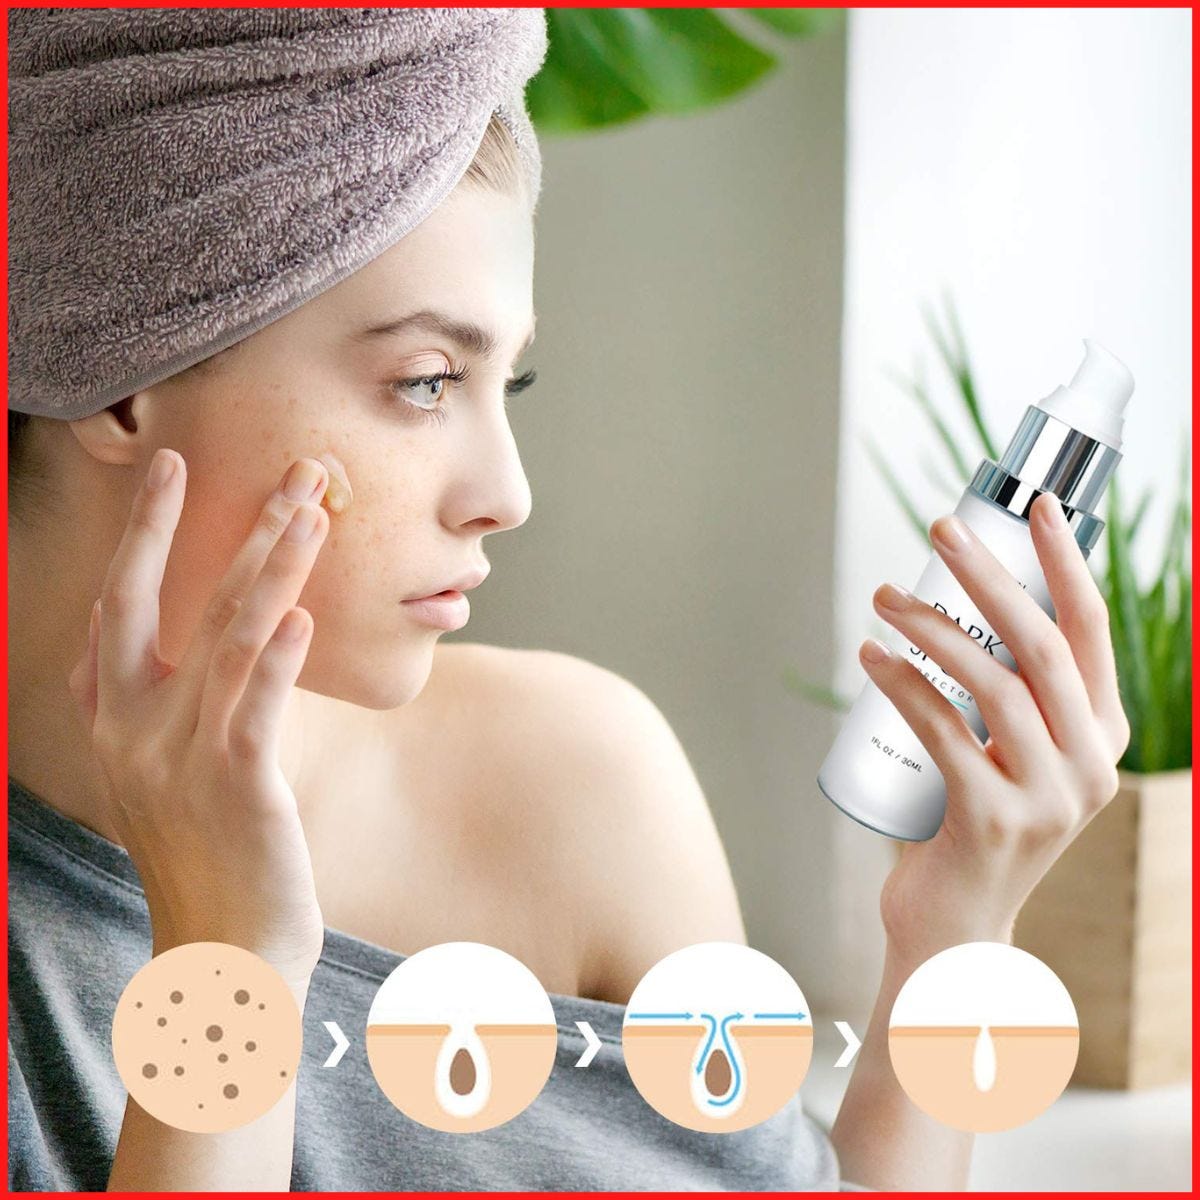 How To Get Rid Of Age Spots And Dark Blemishes In Time For The Summer  Season(Best Anaskin Dark Spot Cleaner Remover, For The Best Face And Body)  | by Lisa Gallagher